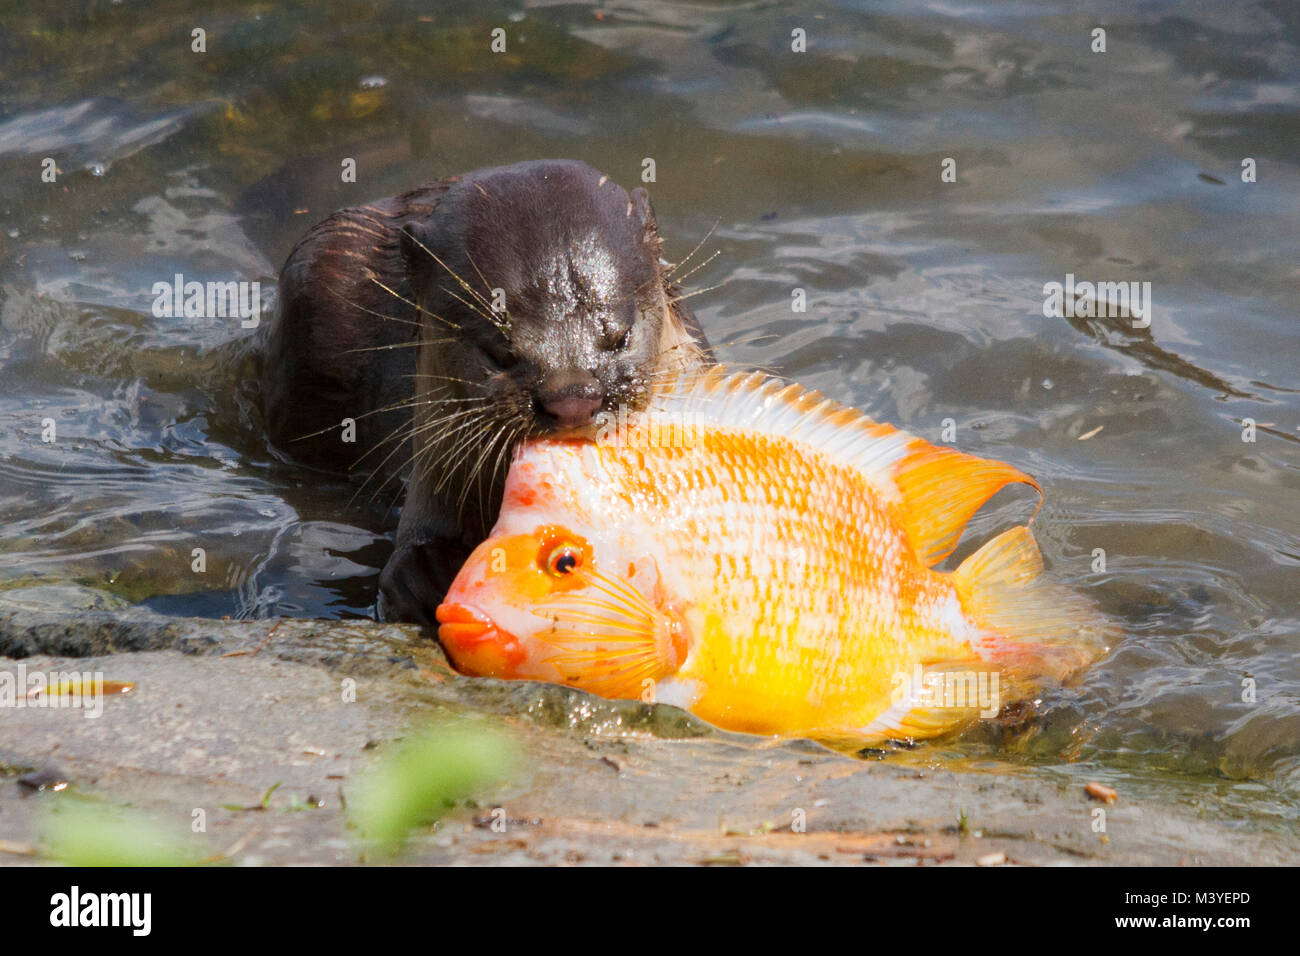 Gardens by the Bay, Singapore. 13th Feb 2018. A juvenile Smooth coated otter struggles to feed on a fish nearly as big as himself. The otters have made a return to Singapore in recent years due to improved water quality and are regular seen entertaining tourists in Gardens by the Bay. Credit:Ed Brown/Alamy Live News Stock Photo